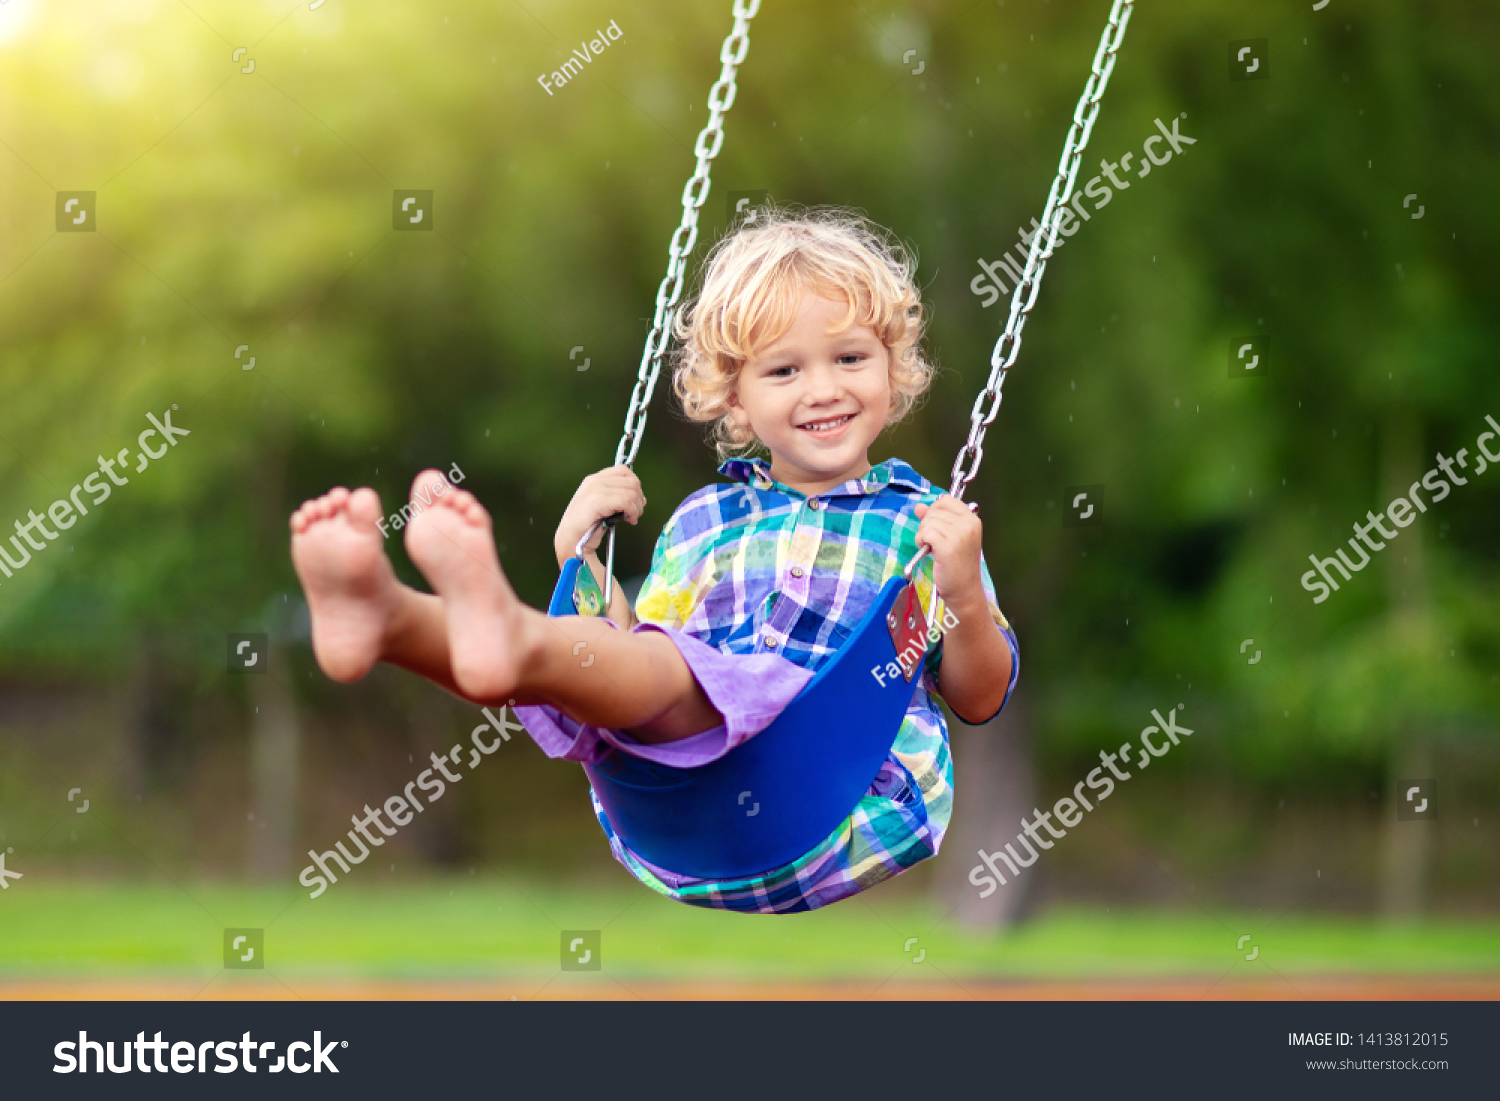 Child playing on outdoor playground in rain. Kids play on school or kindergarten yard. Active kid on colorful swing. Healthy summer activity for children in rainy weather. Little boy swinging. #1413812015